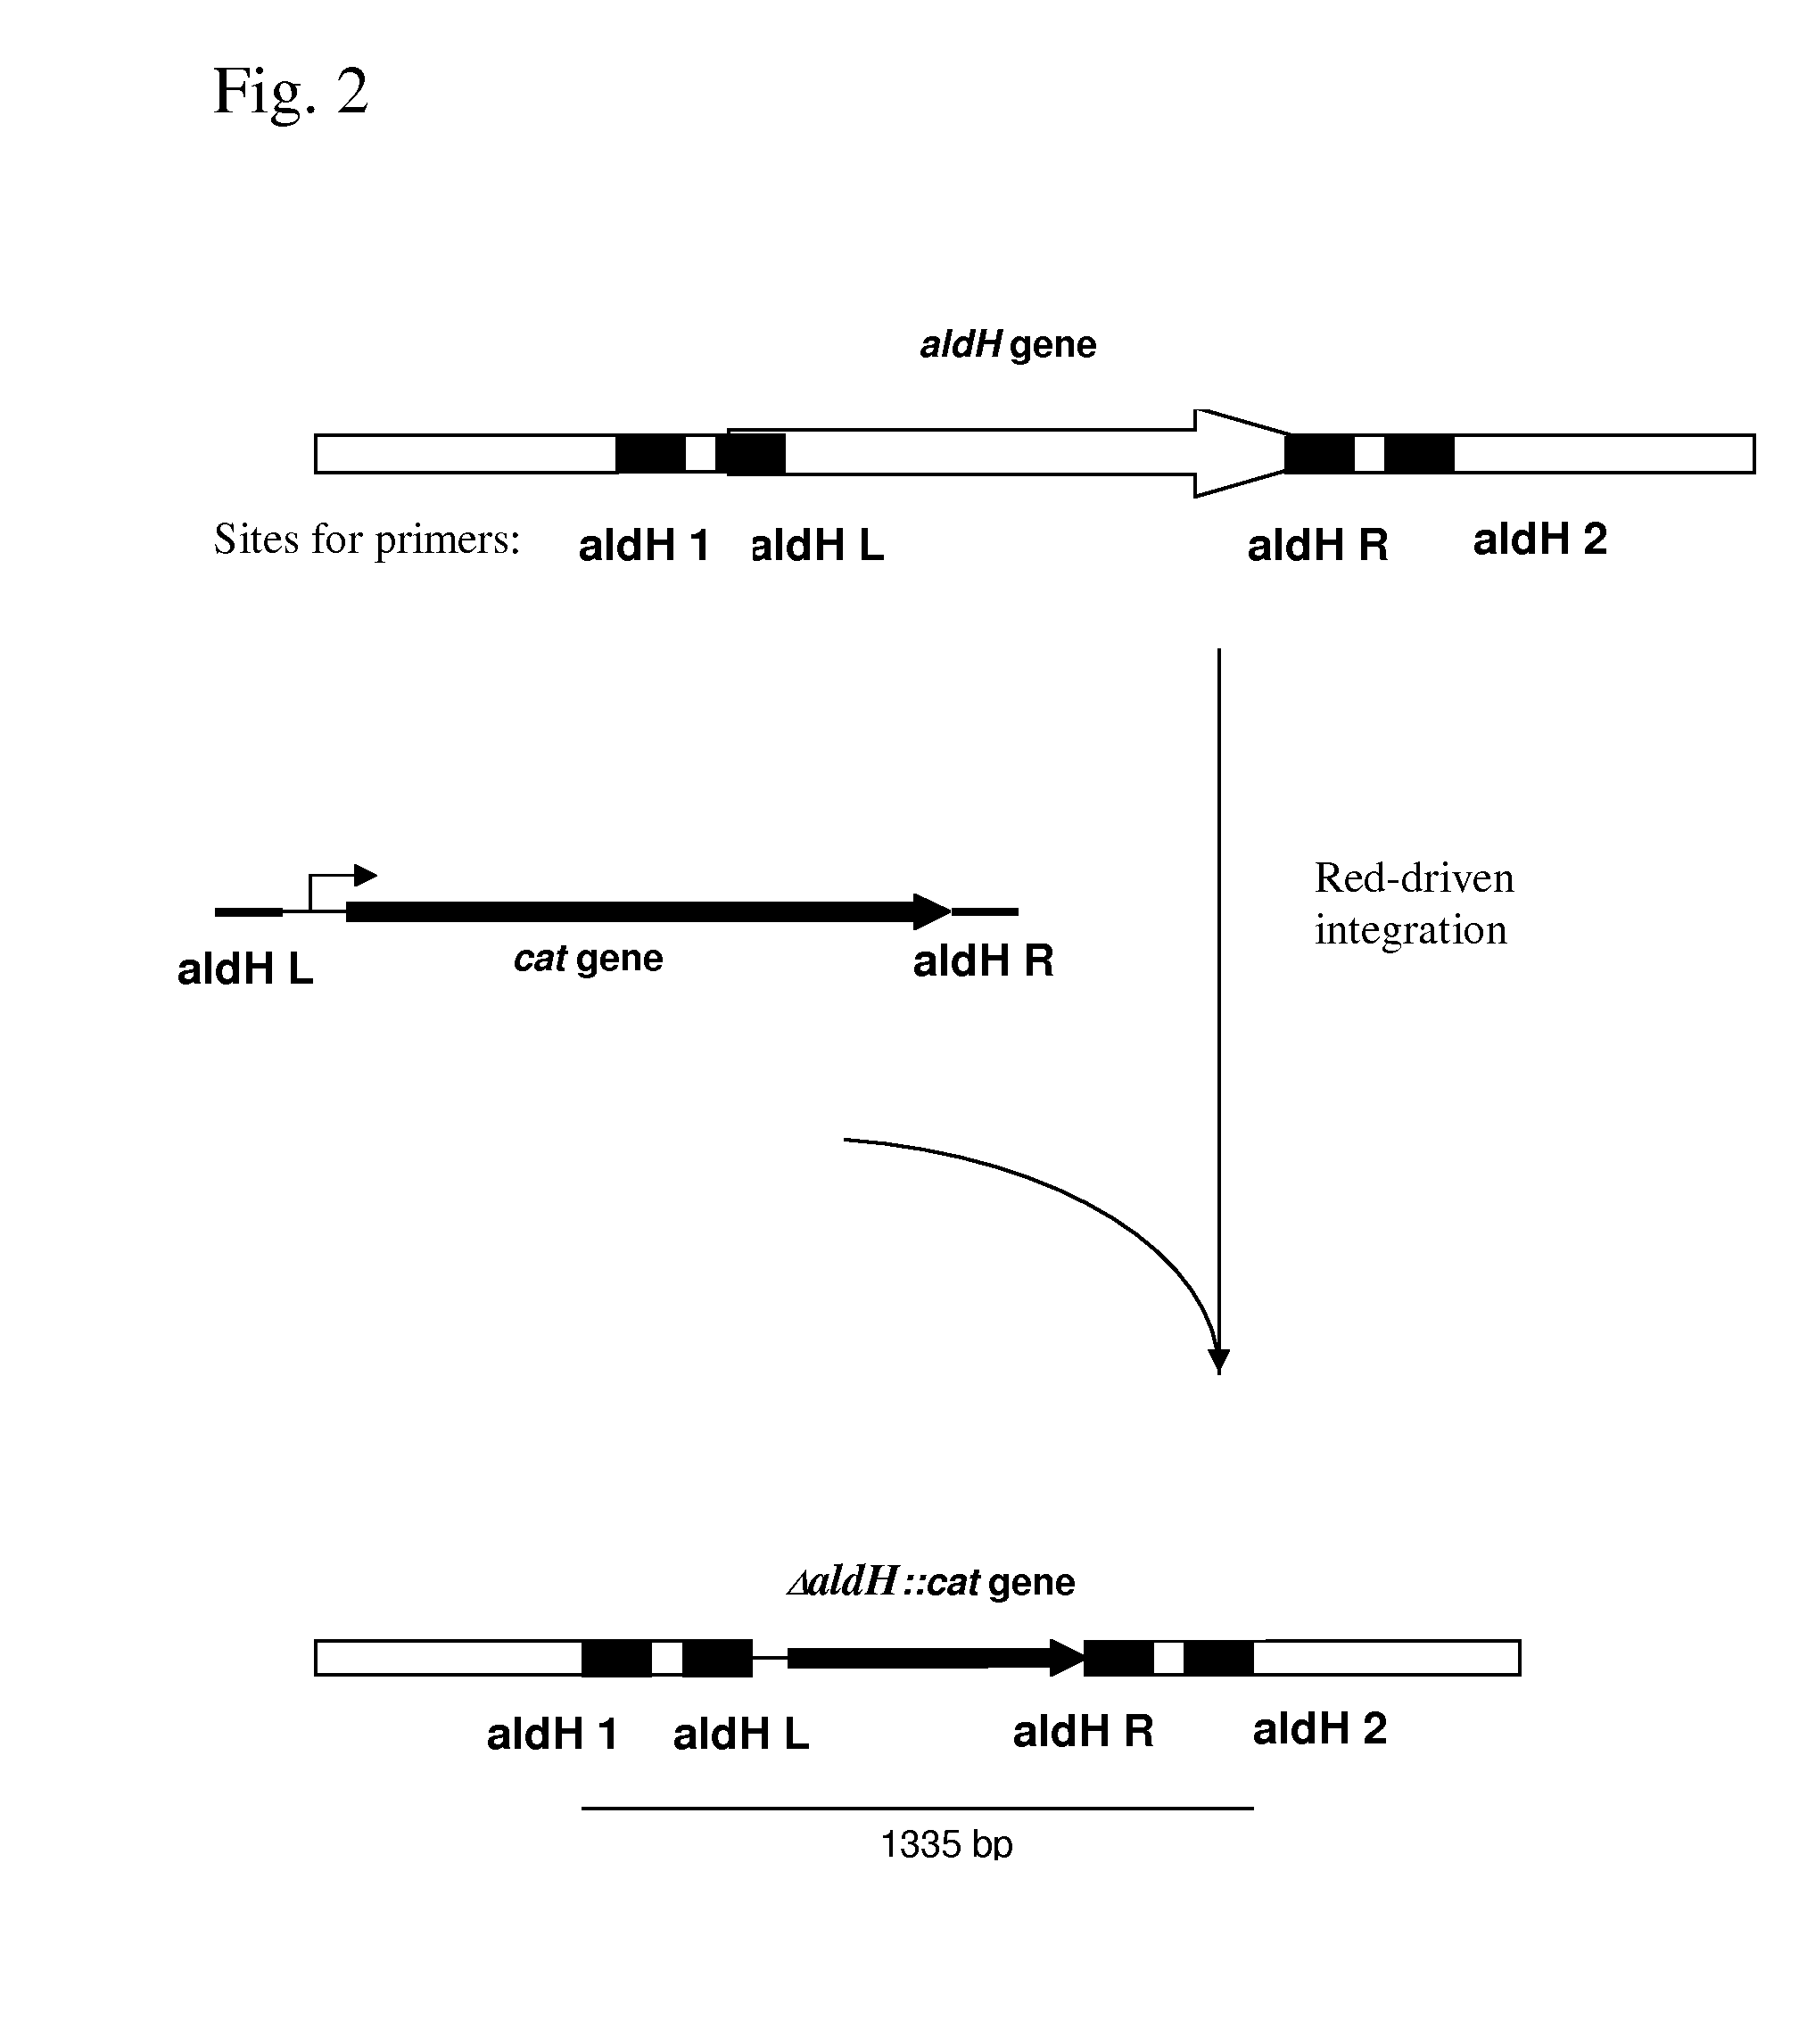 METHOD FOR PRODUCING AN L-AMINO ACID USING A BACTERIUM OF ENTEROBACTERIACEAE FAMILY WITH ATTENUATED EXPRESSION OF THE aldH GENE